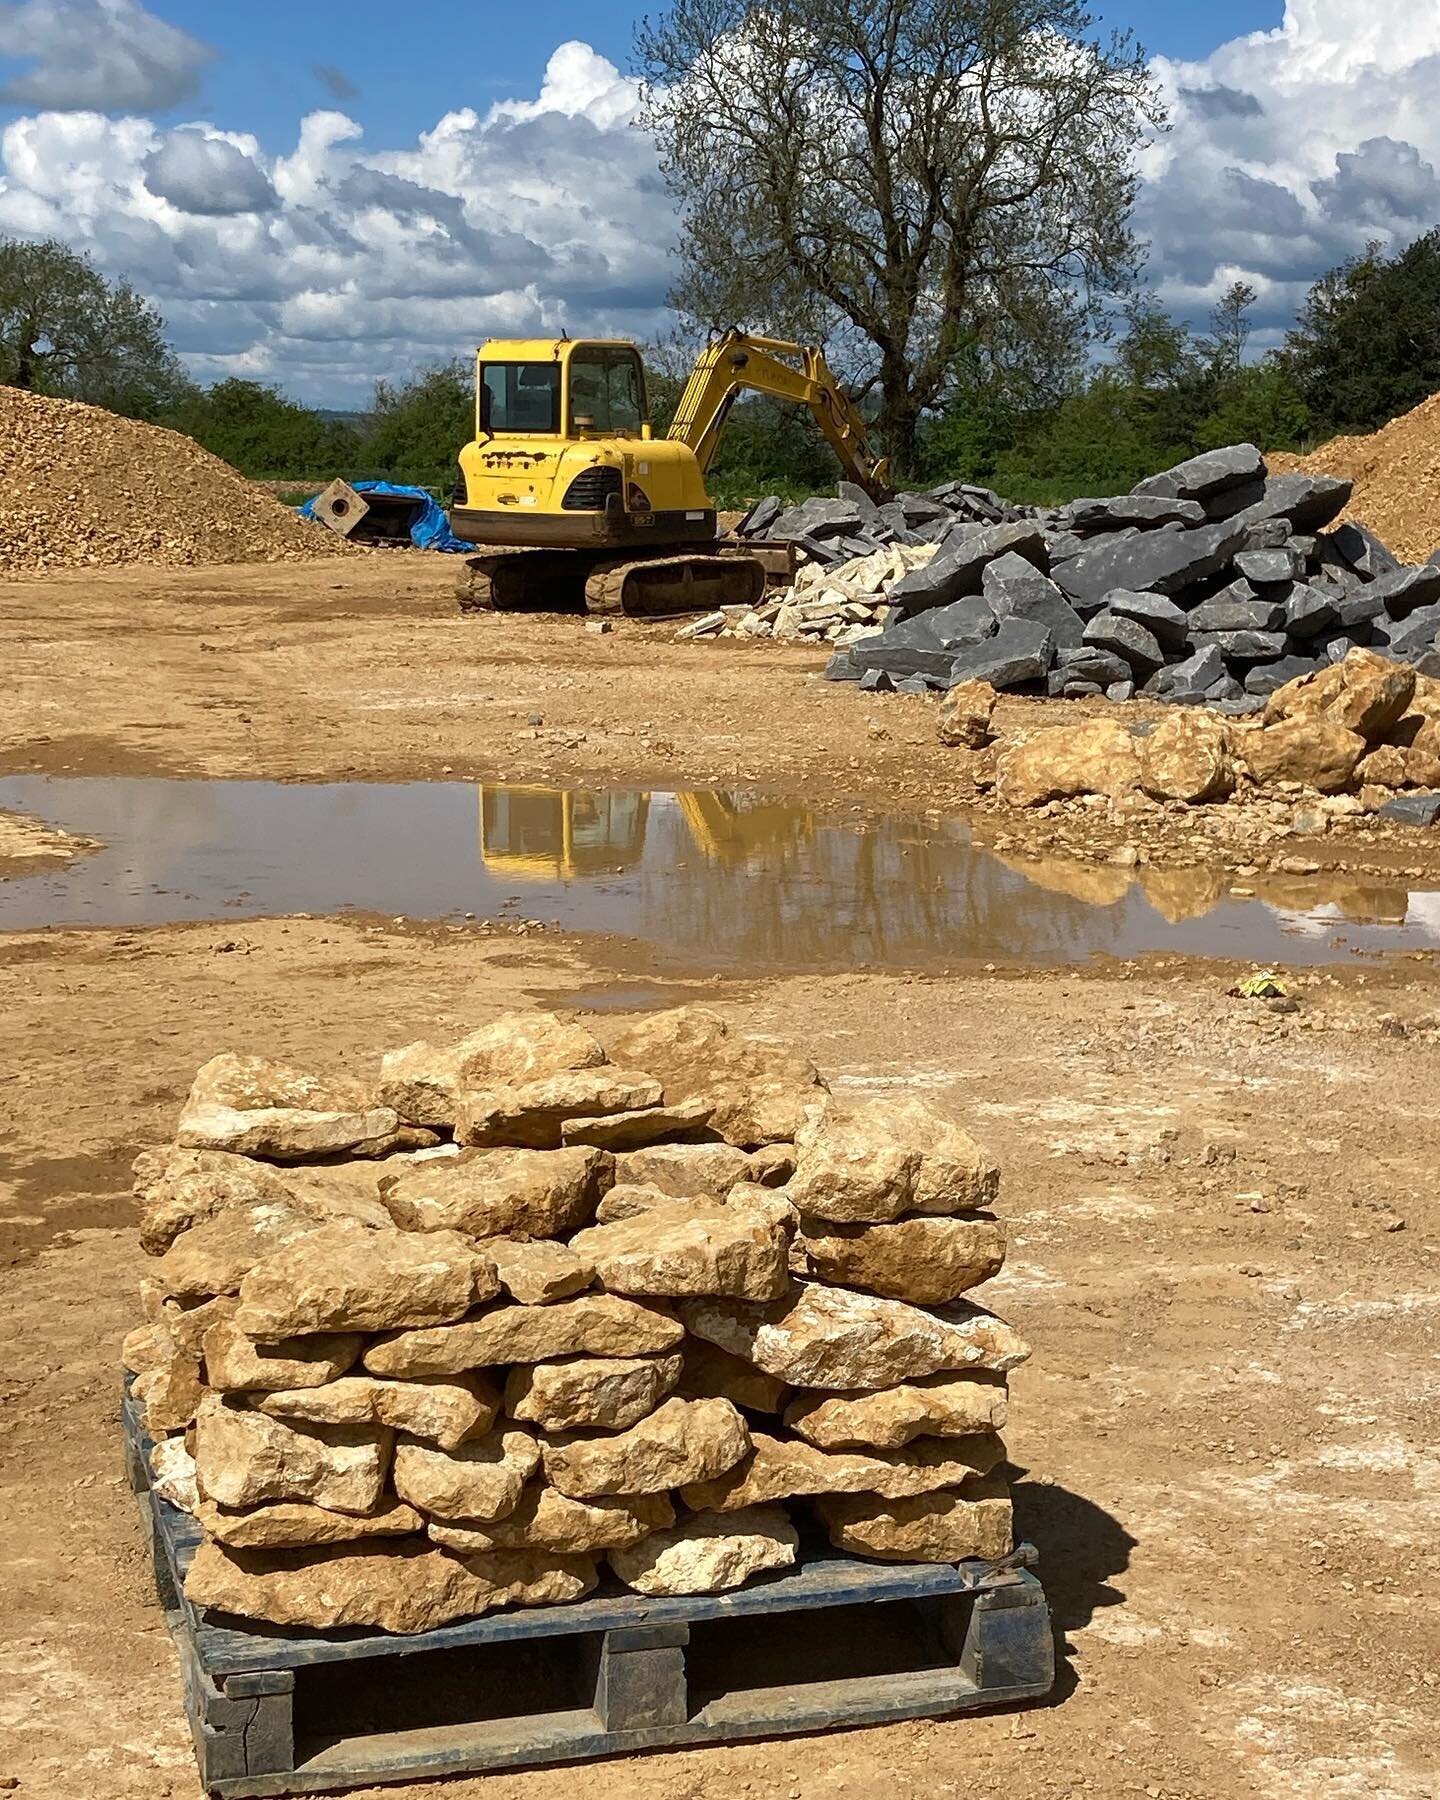 A visit to a quarry @hadspenquarry with @charles_dowding to finish his pond with @myco_ad. A van and car full of Cary Stone ( Castle Cary), rinsed, laid on felt #cementfree and then gap filled with topsoil. With EXACTLY the right amount of stone! hig